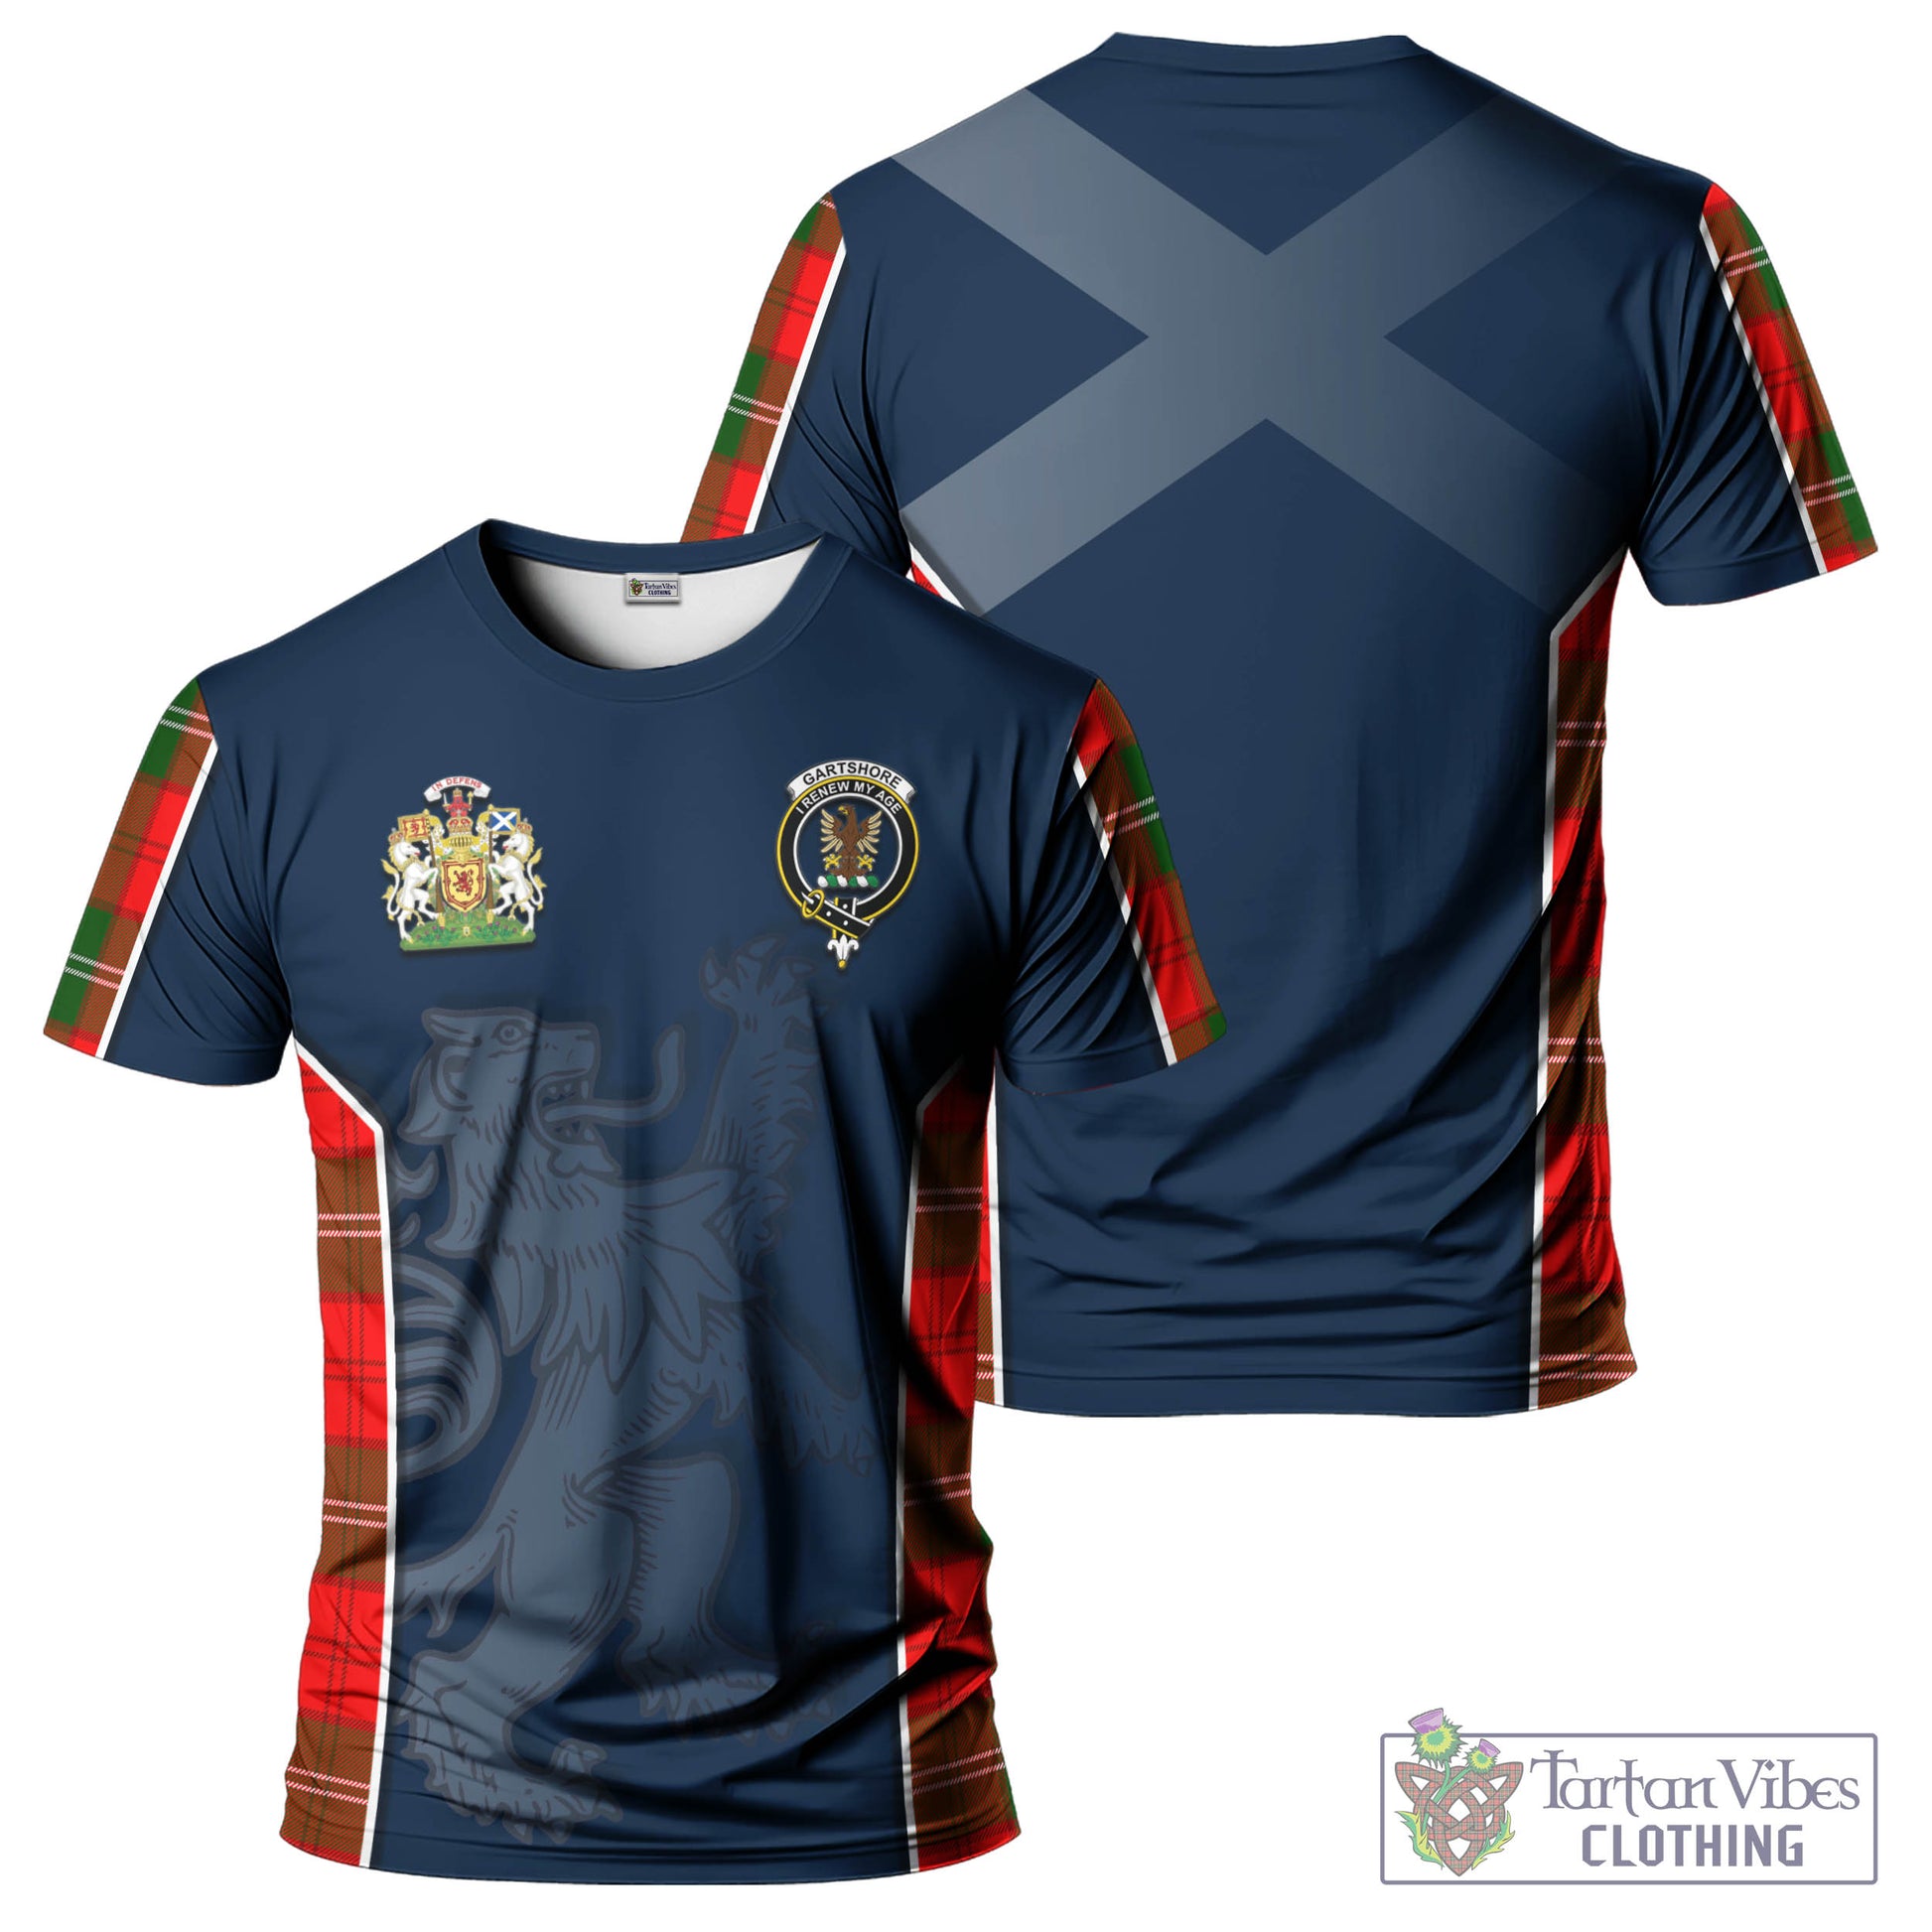 Tartan Vibes Clothing Gartshore Tartan T-Shirt with Family Crest and Lion Rampant Vibes Sport Style